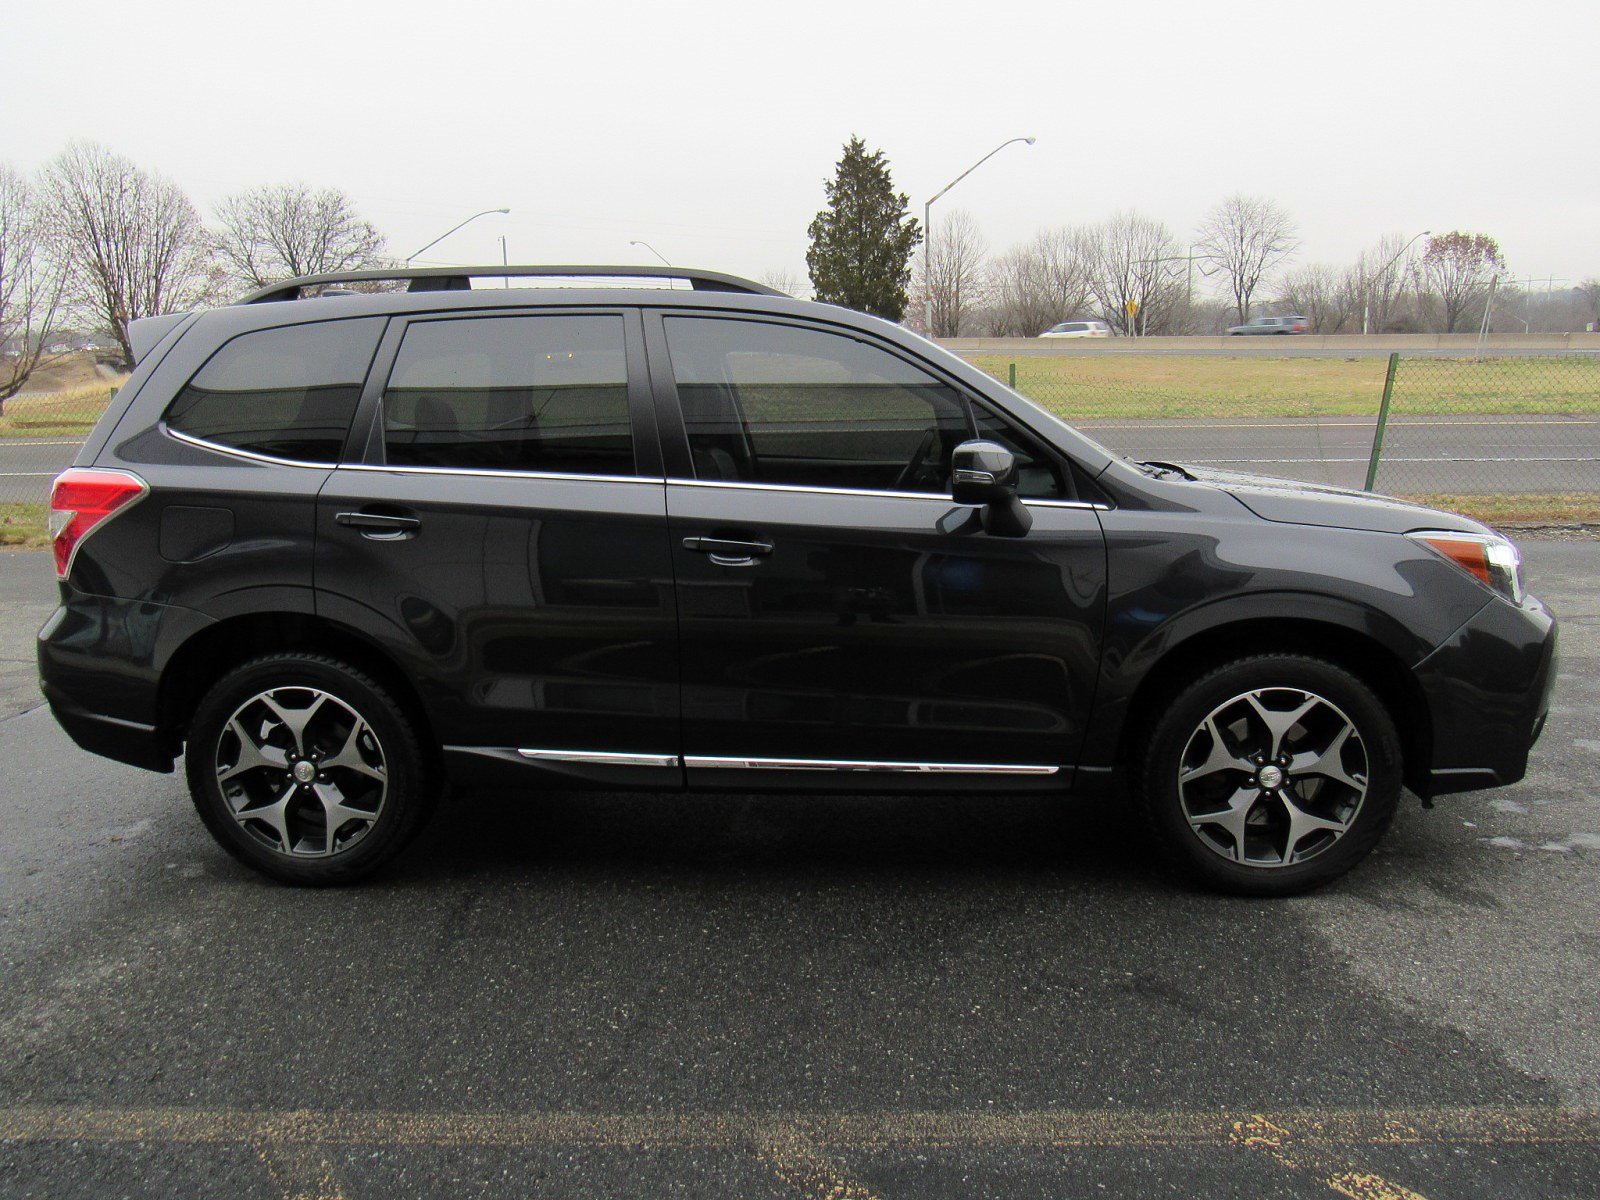 PreOwned 2016 Subaru Forester 2.0XT Touring Sport Utility